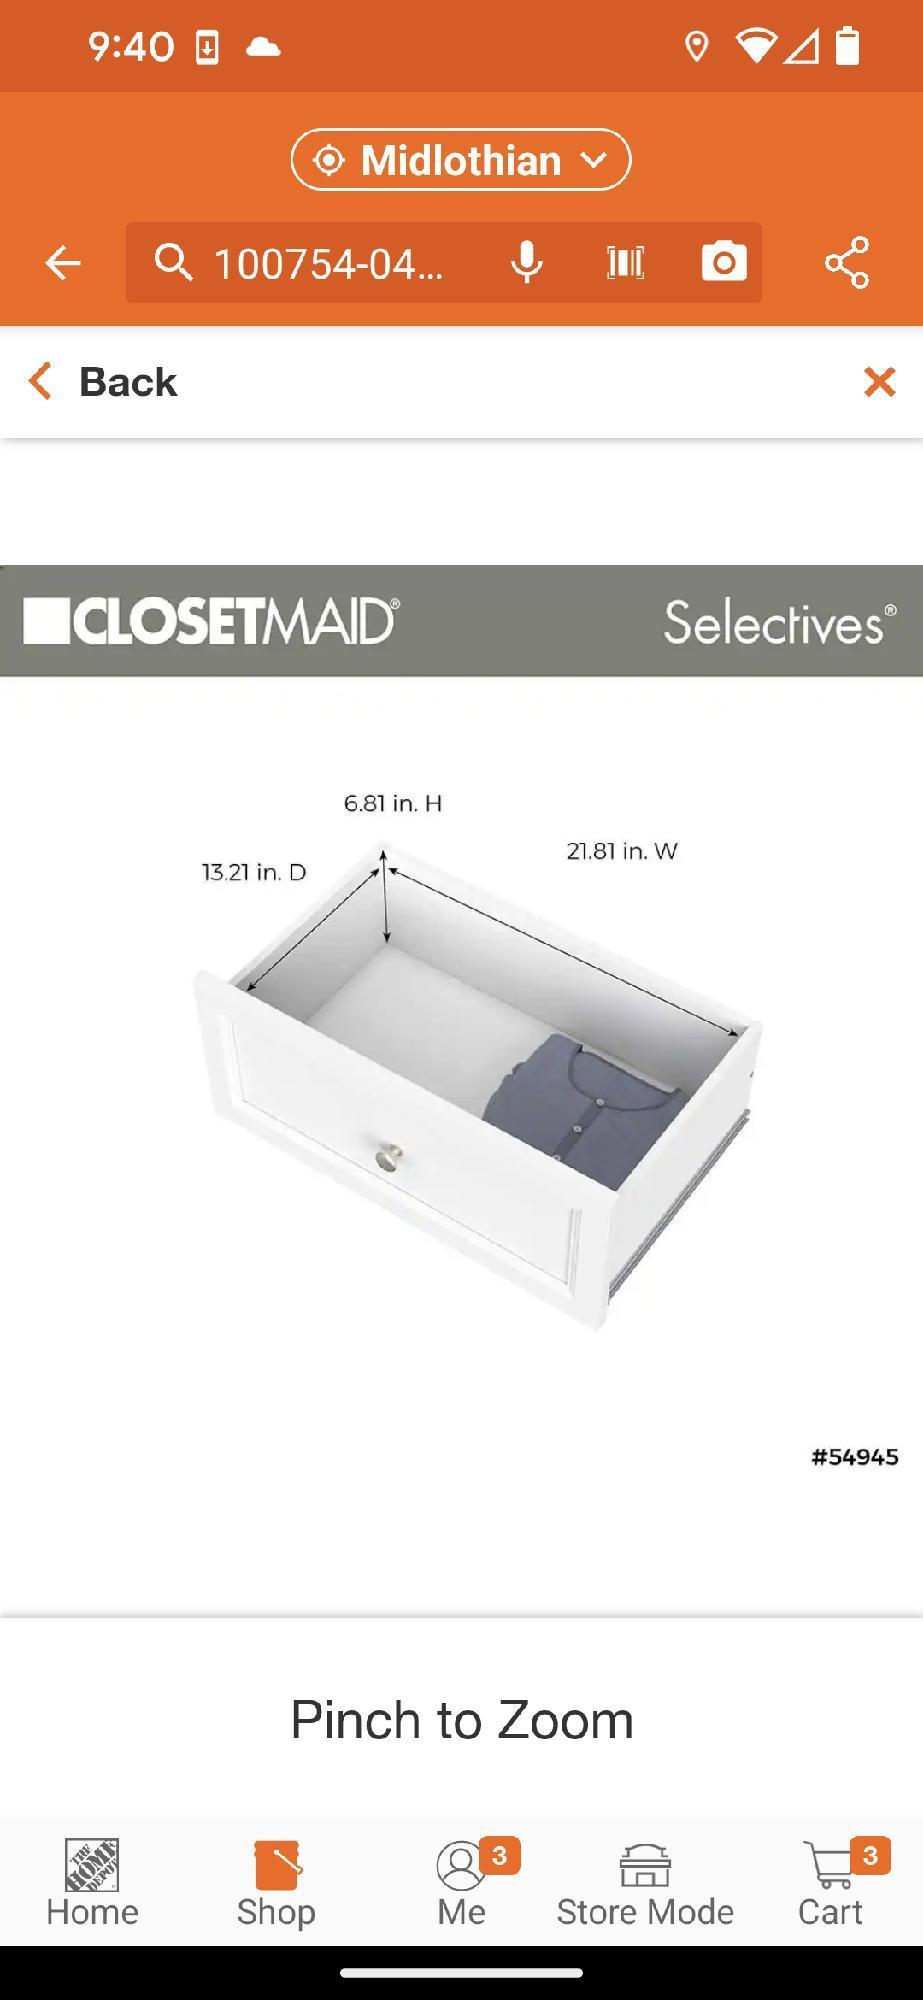 ClosetMaid Selectives 10 in. H x 23.5 in. W White Wood Drawer with Silver Handle, Appears to be New